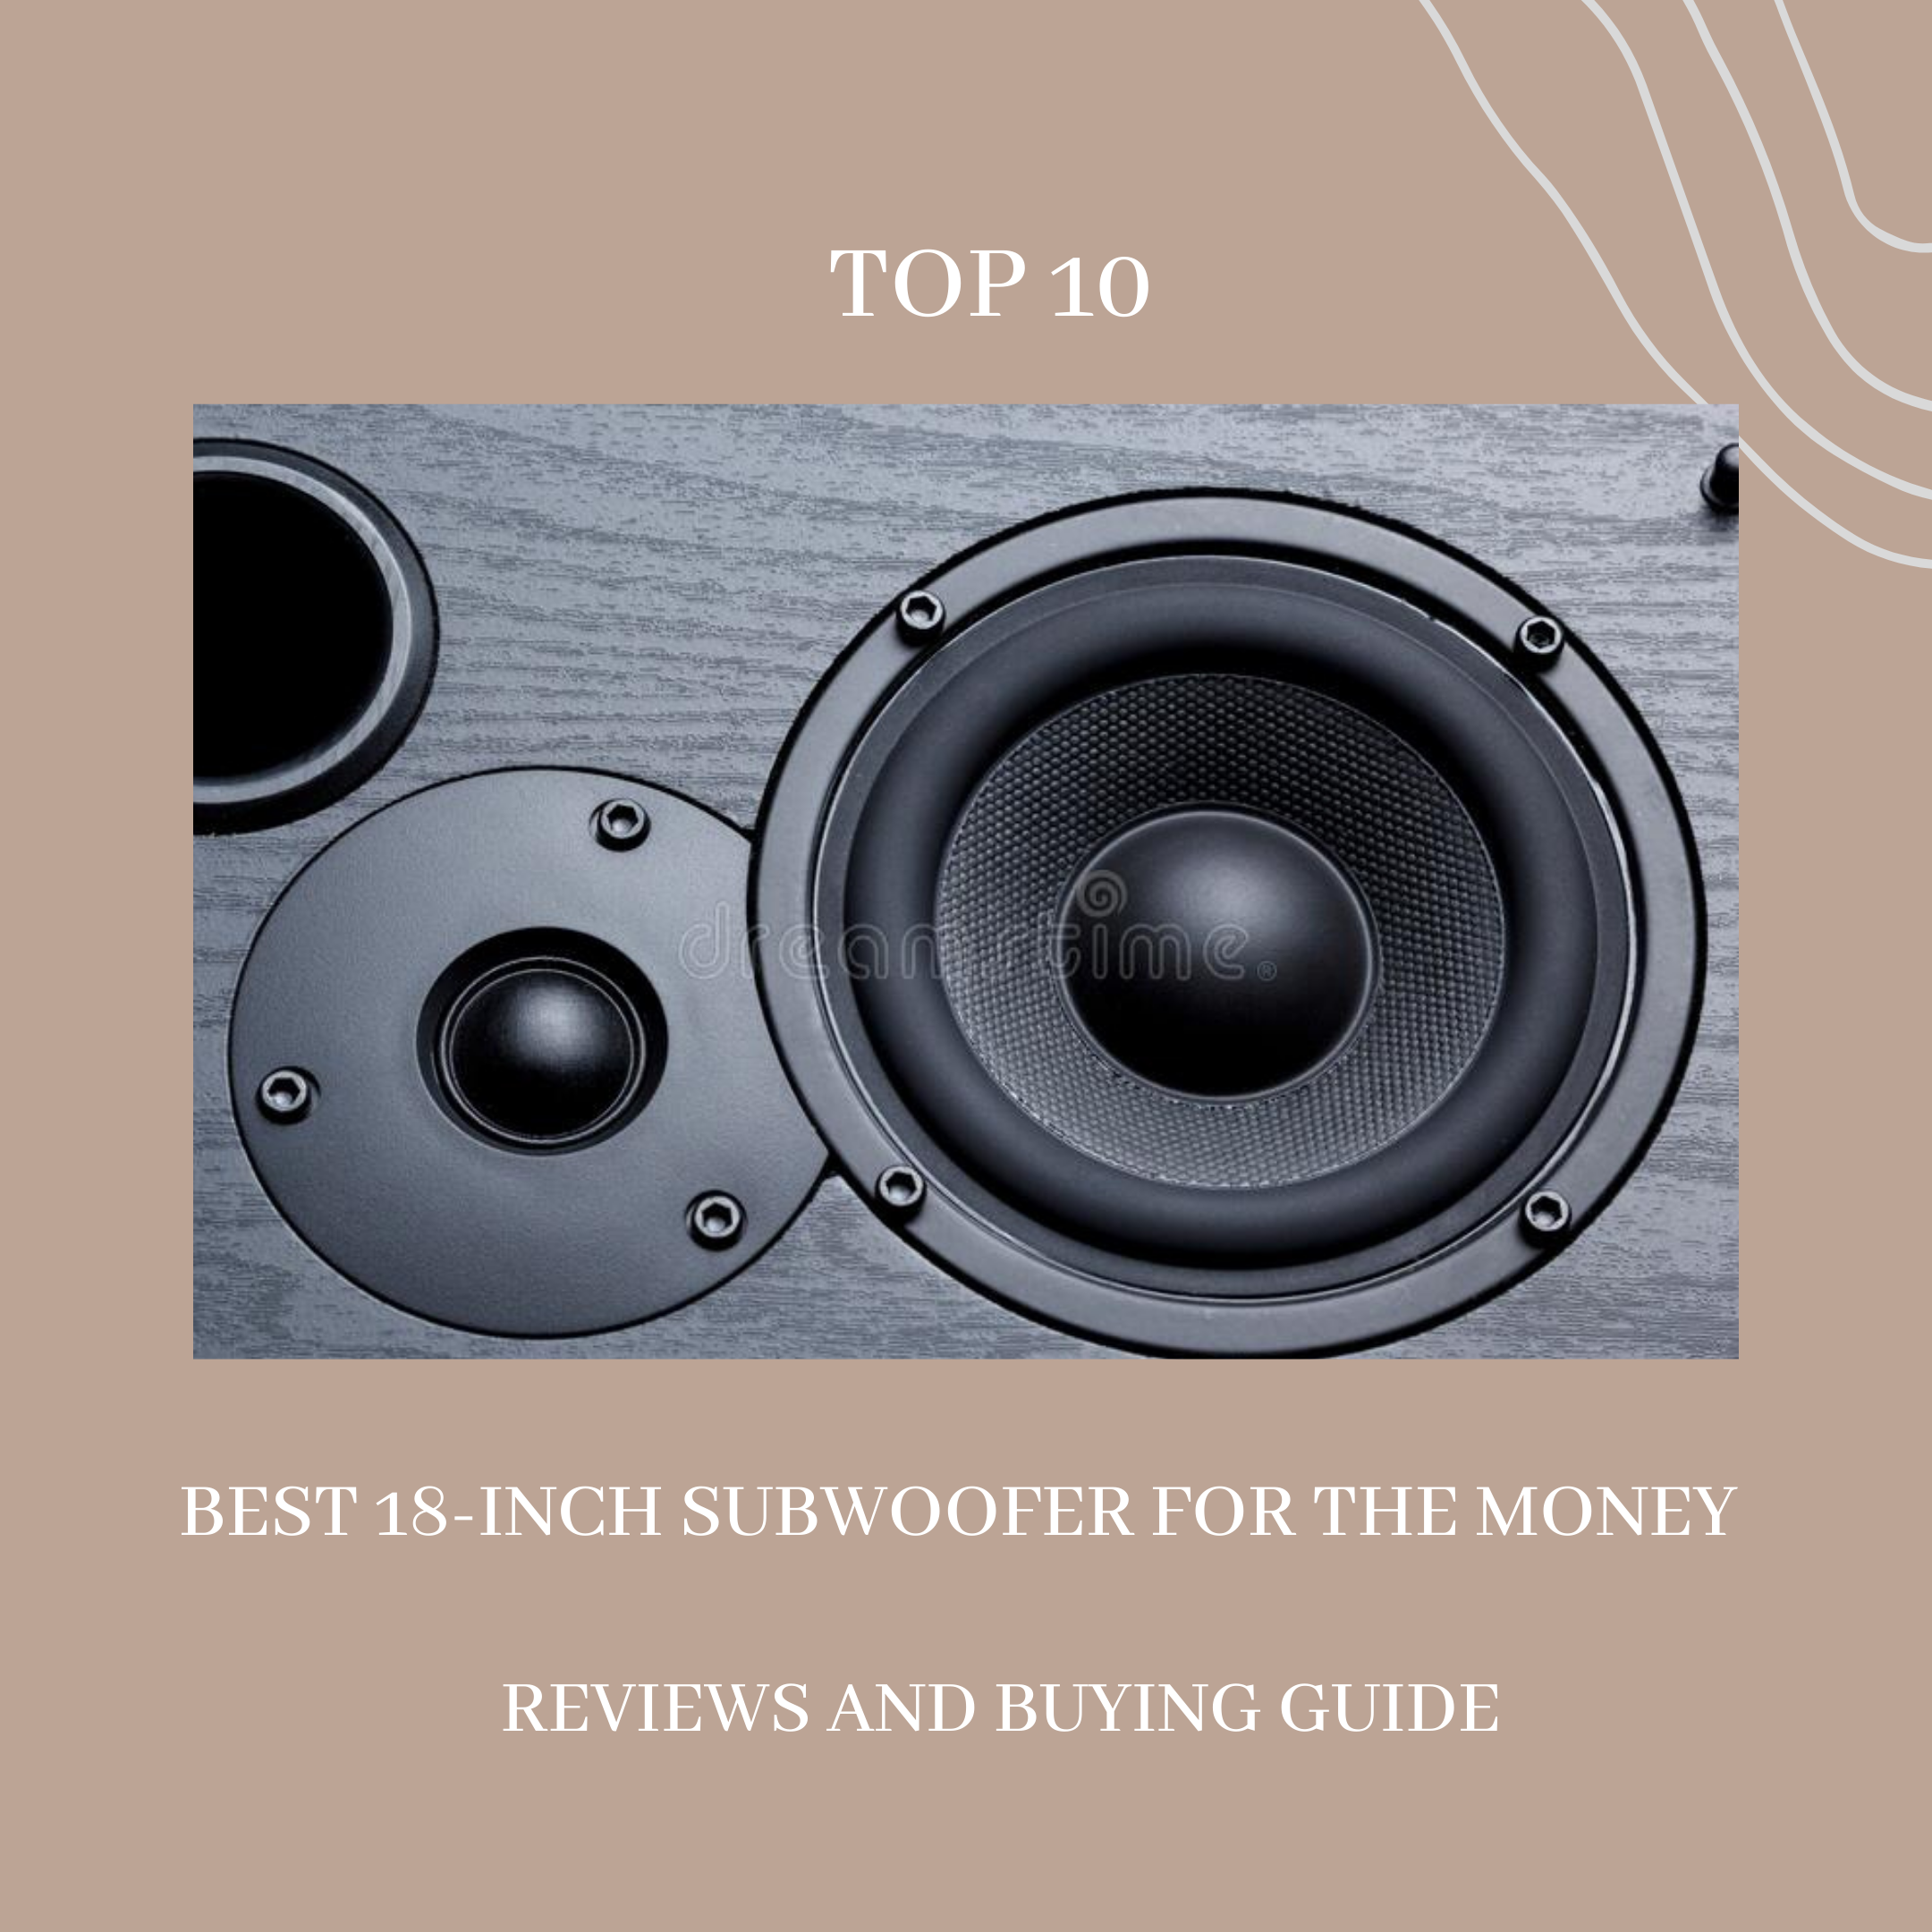 Best 18-inch Subwoofer for the Money